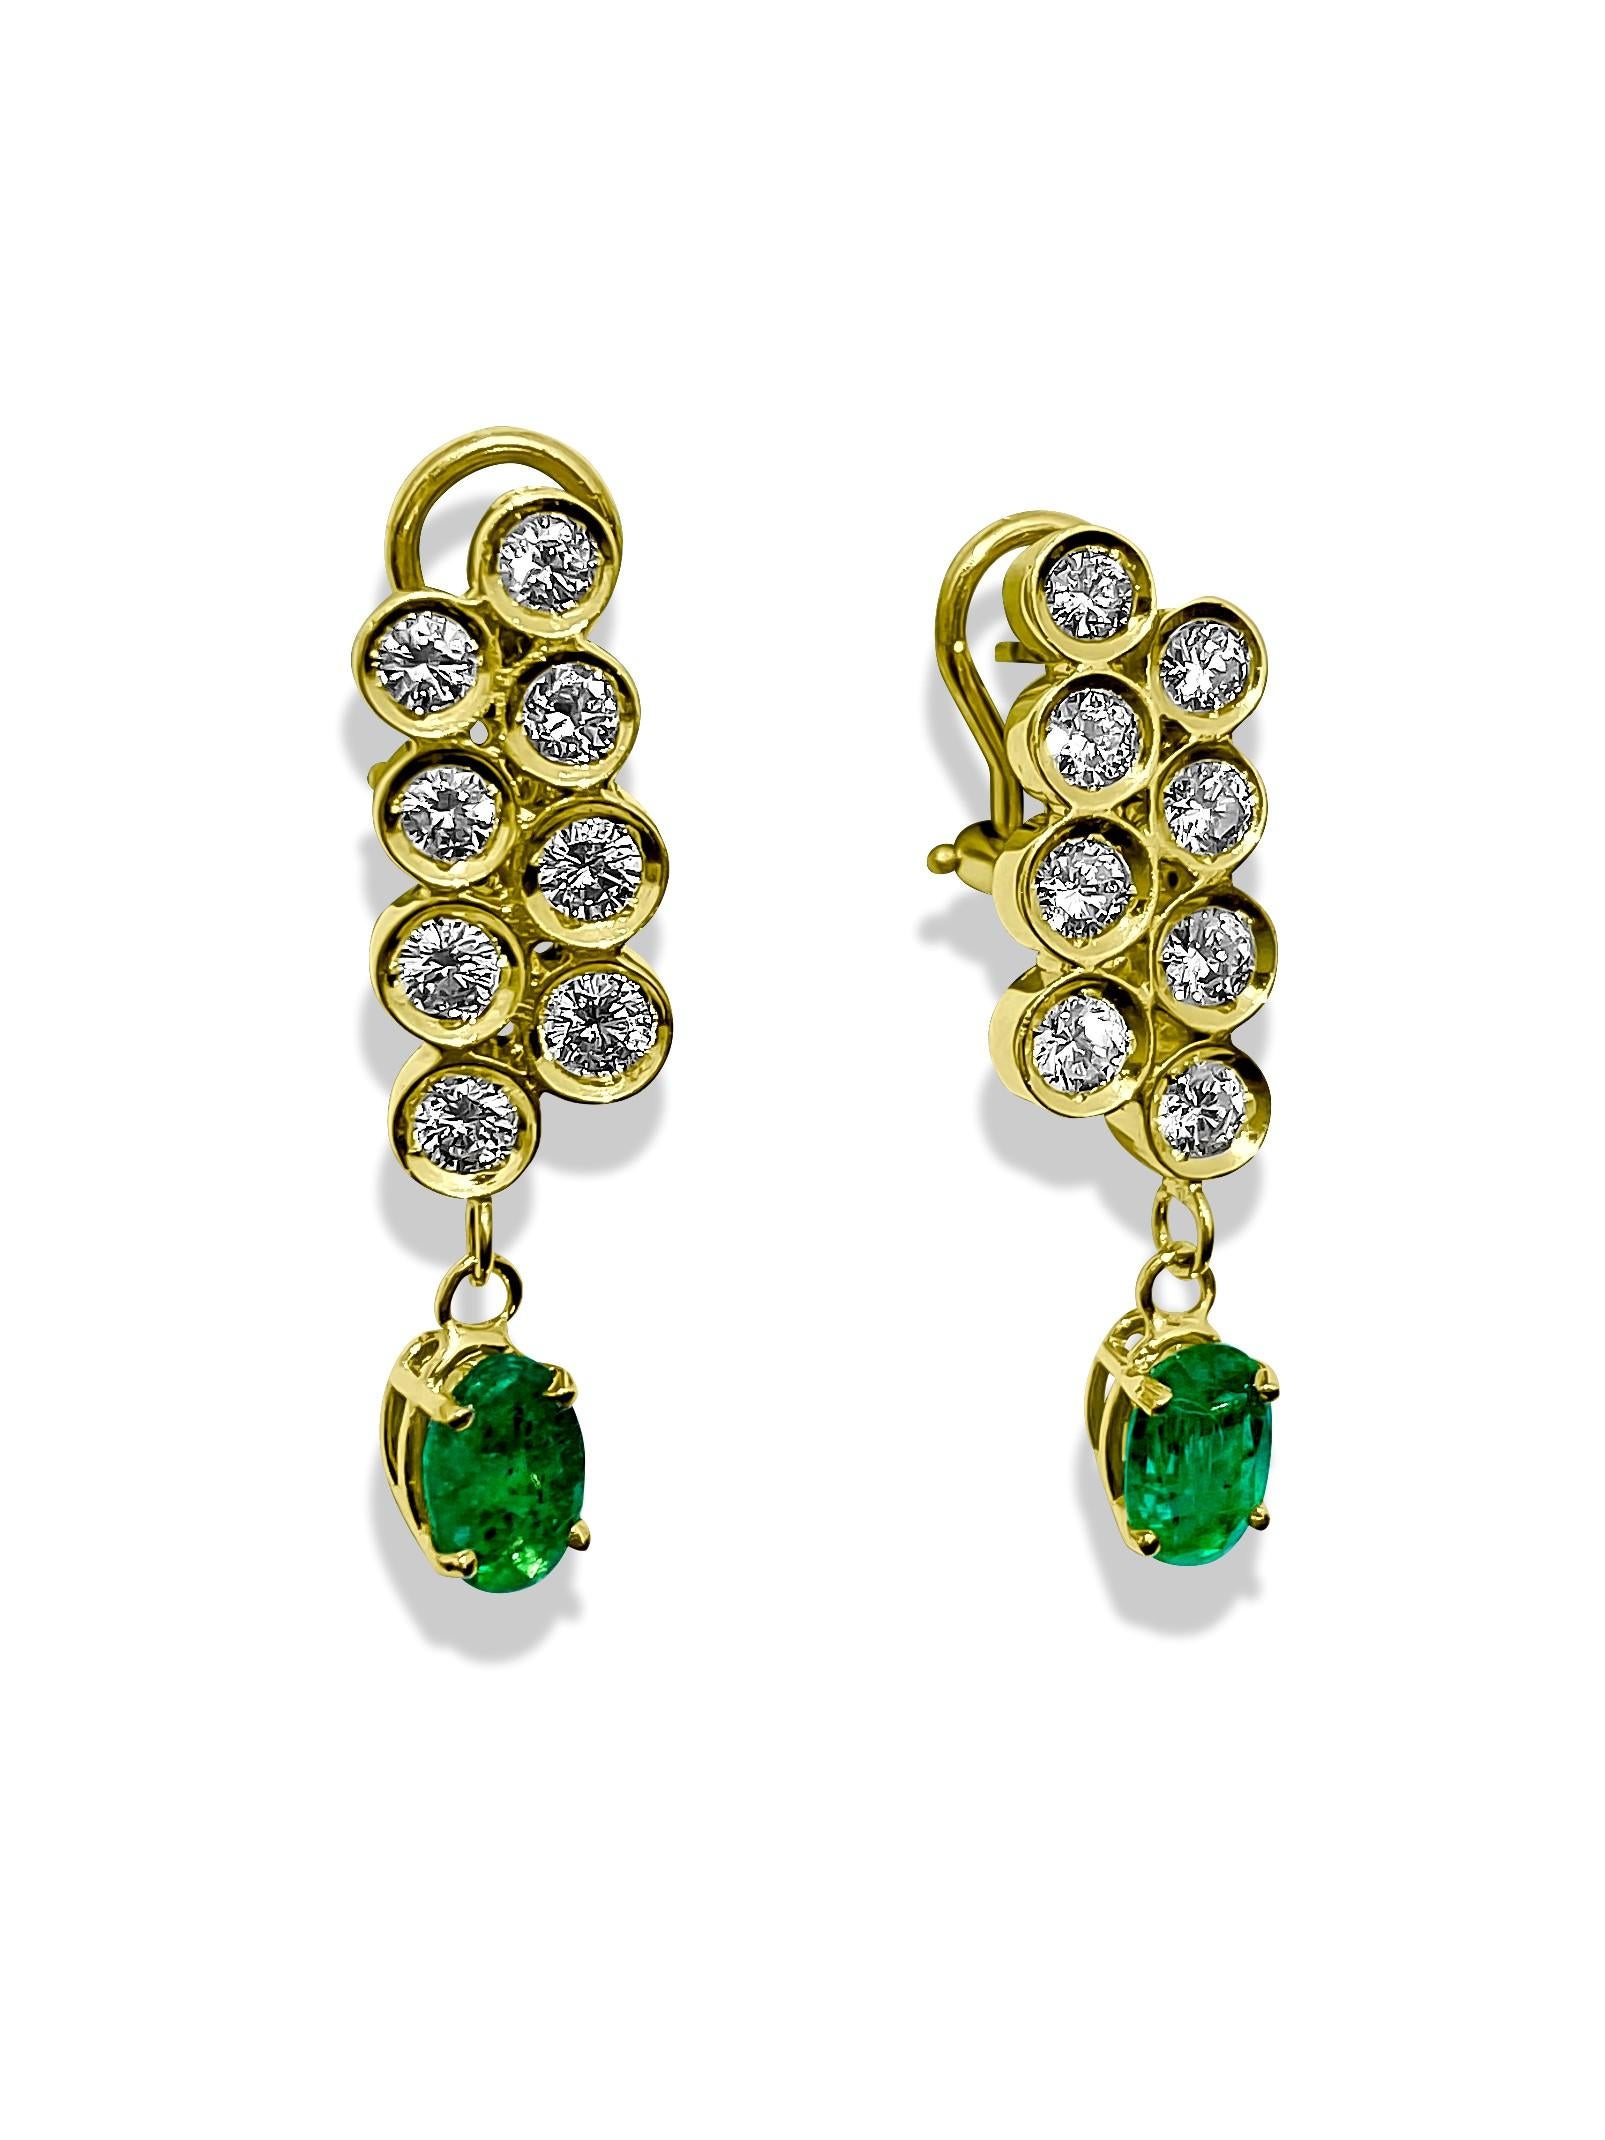 Introducing these exquisite clip-on earrings, crafted from 18K yellow gold and adorned with 2.00 carats of oval-shaped emeralds and 1.50 carats of round brilliant-cut diamonds. With excellent saturation and color in the emeralds and VVS clarity and